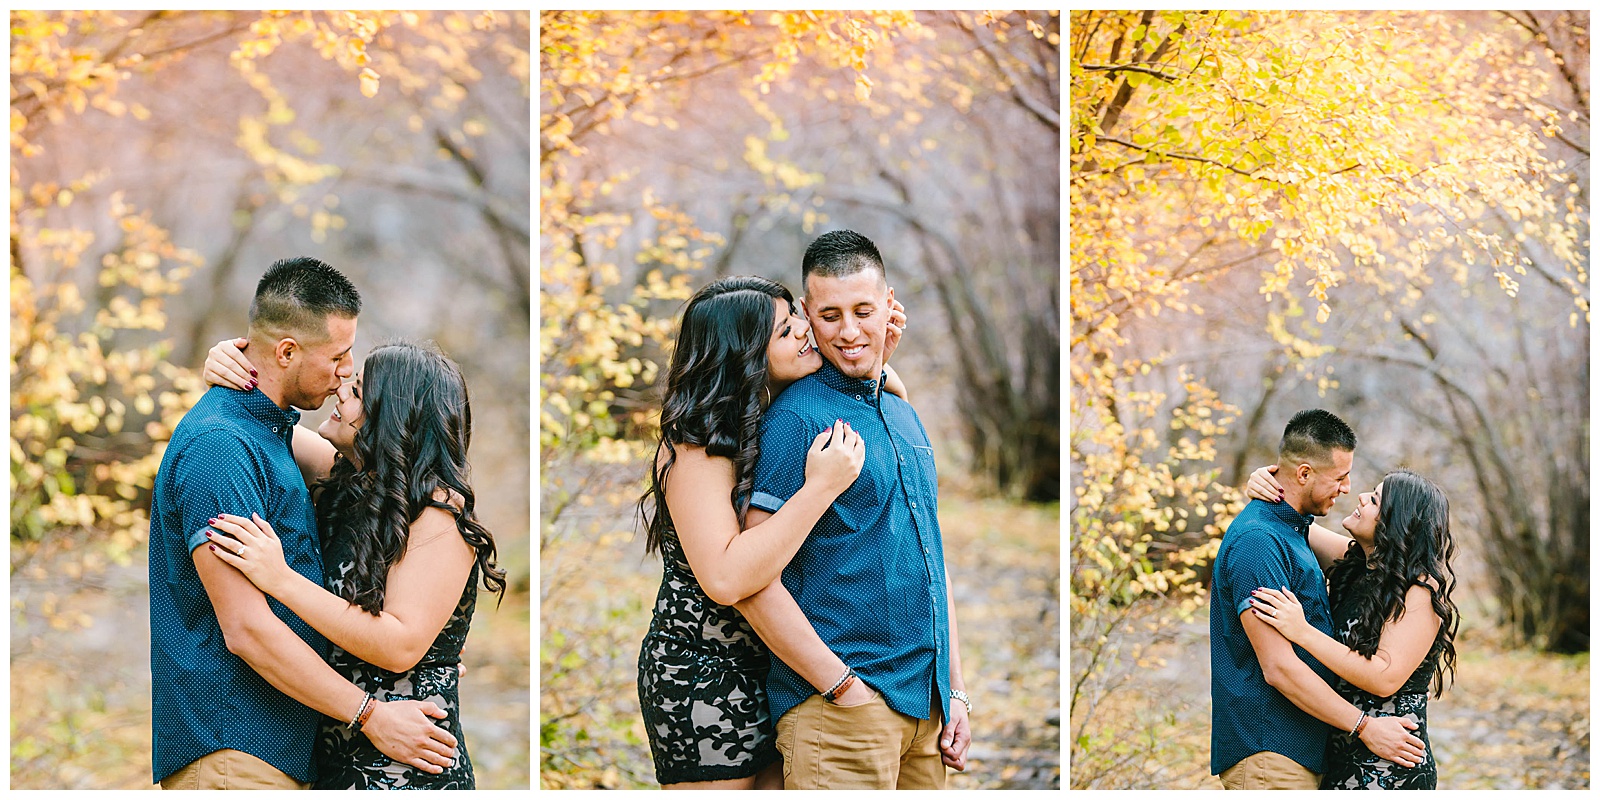 Kelly Canyon Engagement Fall Leaves